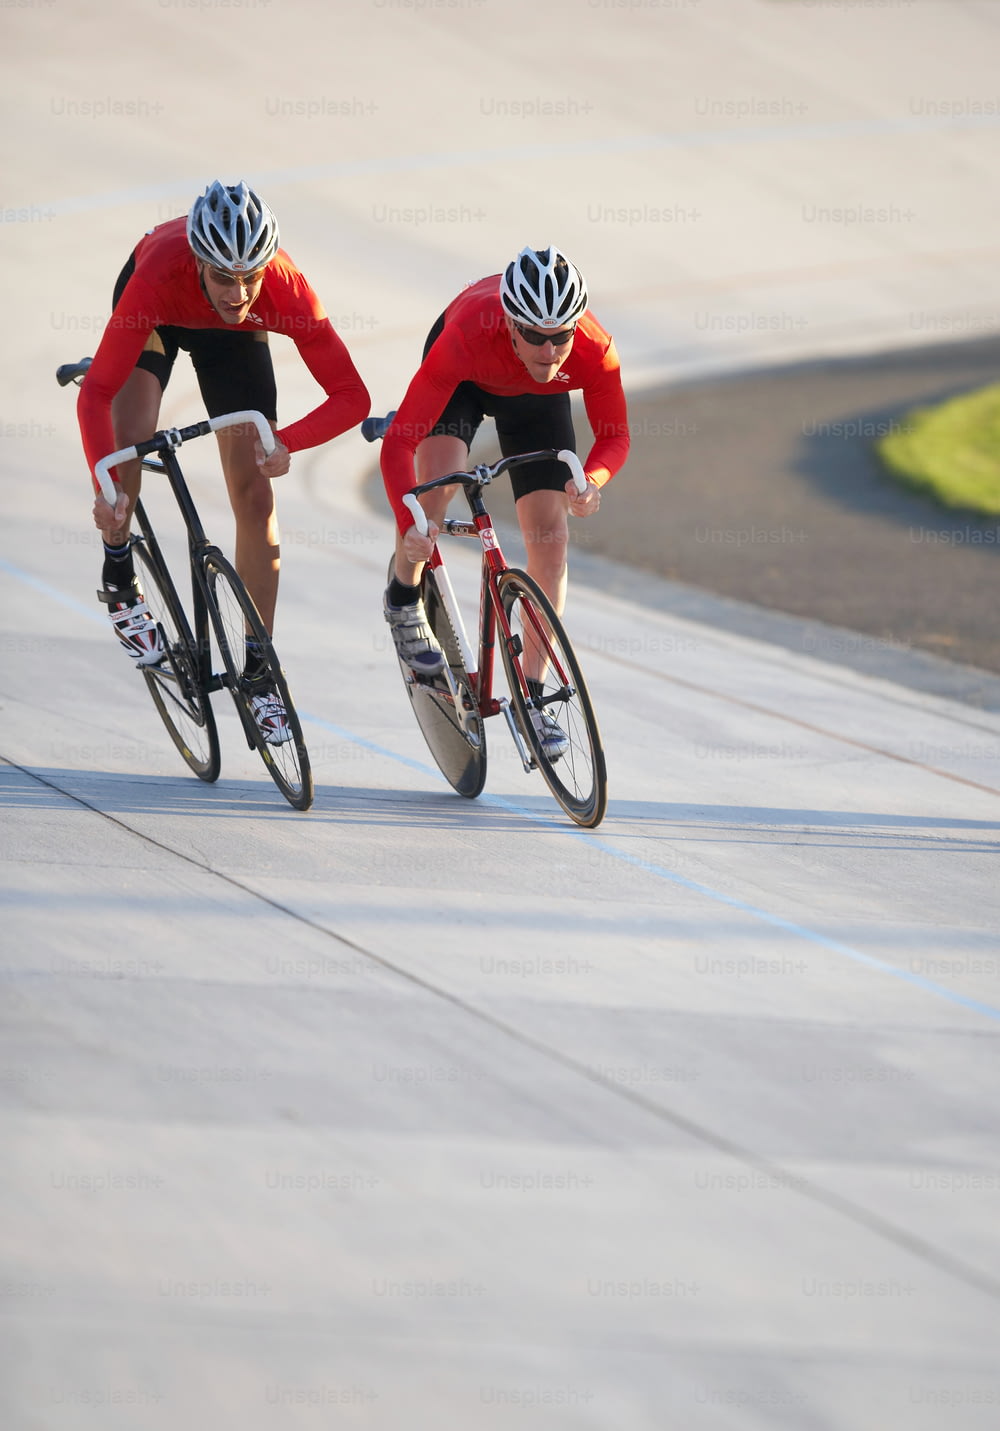 two bicyclists racing down a paved road